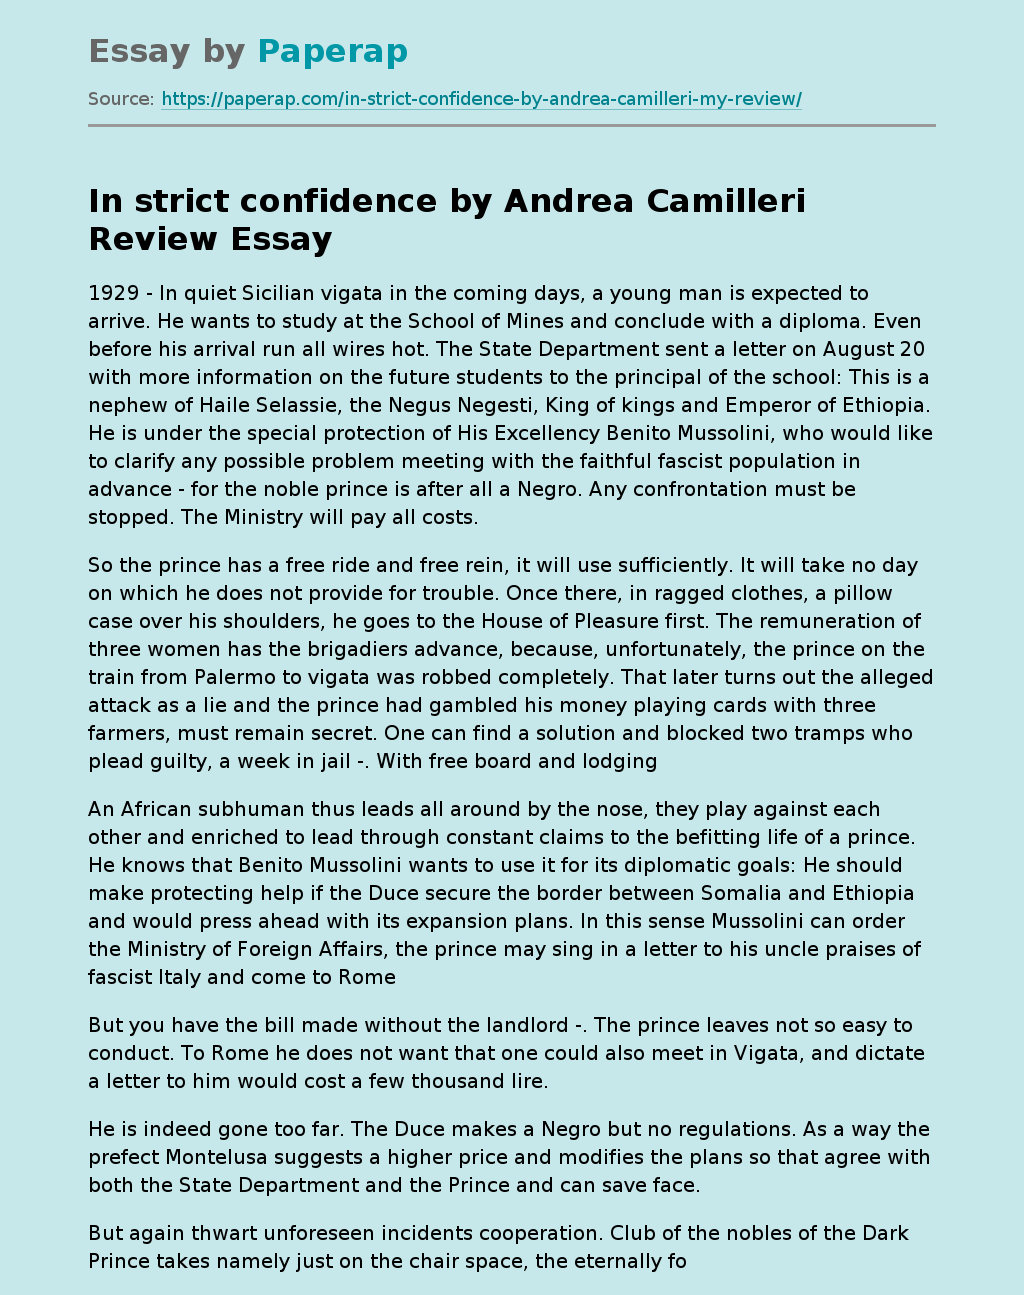 In strict confidence by Andrea Camilleri Review